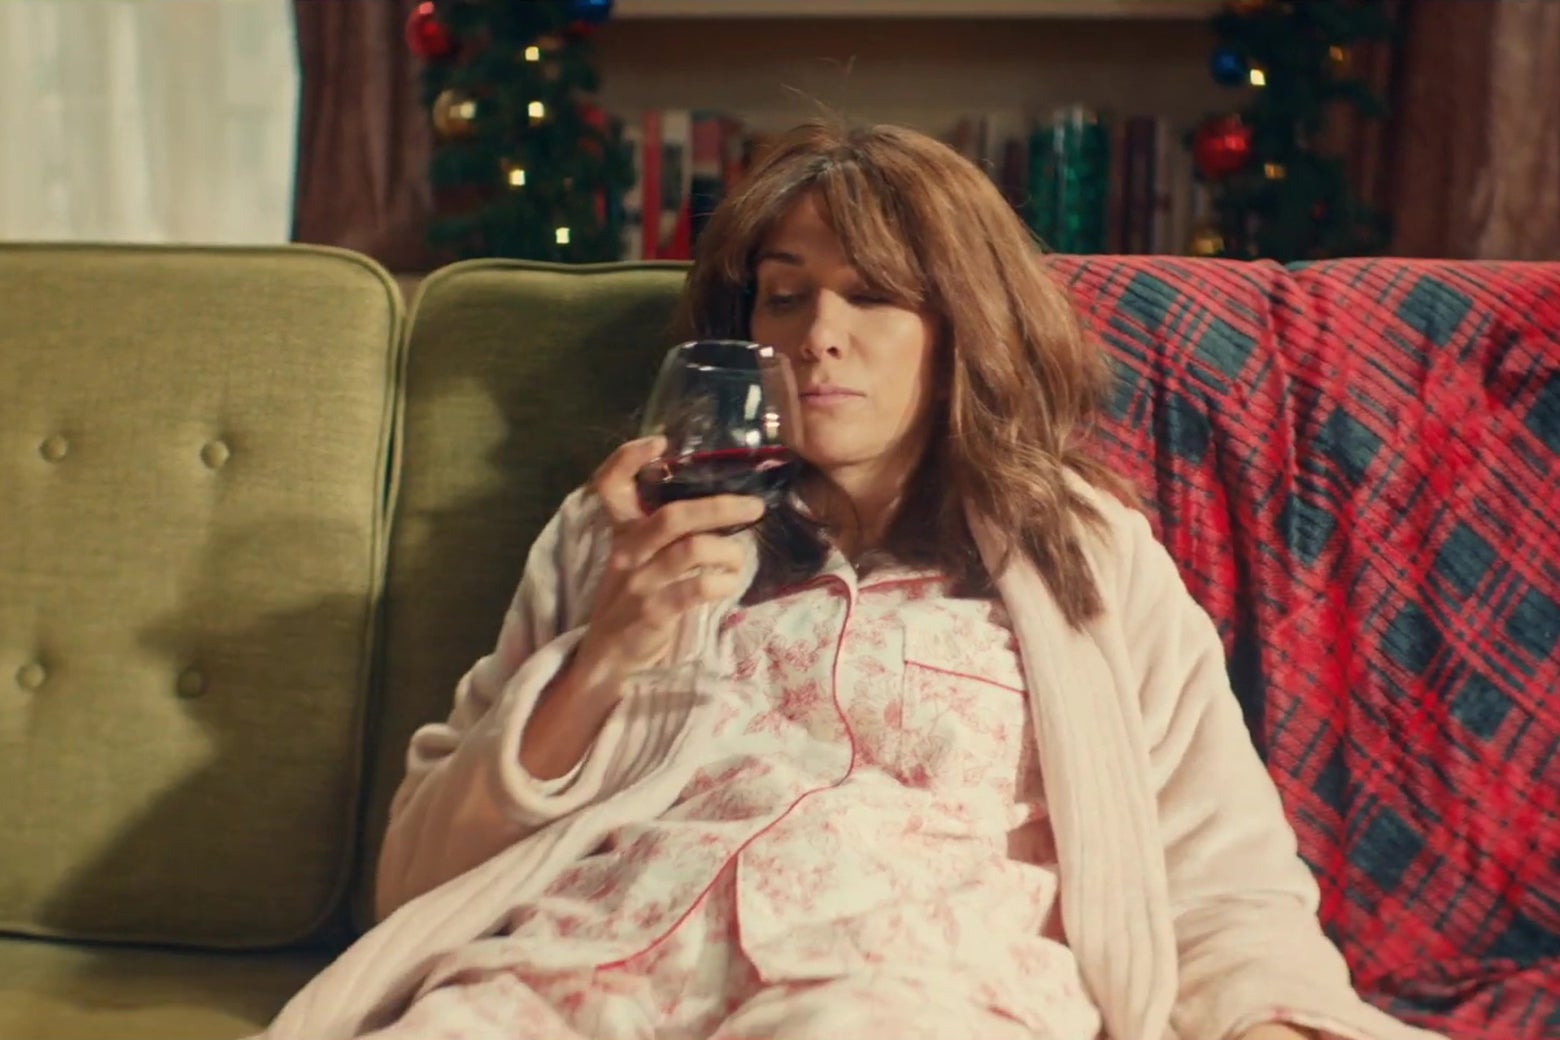 Kristen Wiig slouches on a couch in a living room covered with Christmas decorations, wearing a new robe, drinking a large glass of red wine.